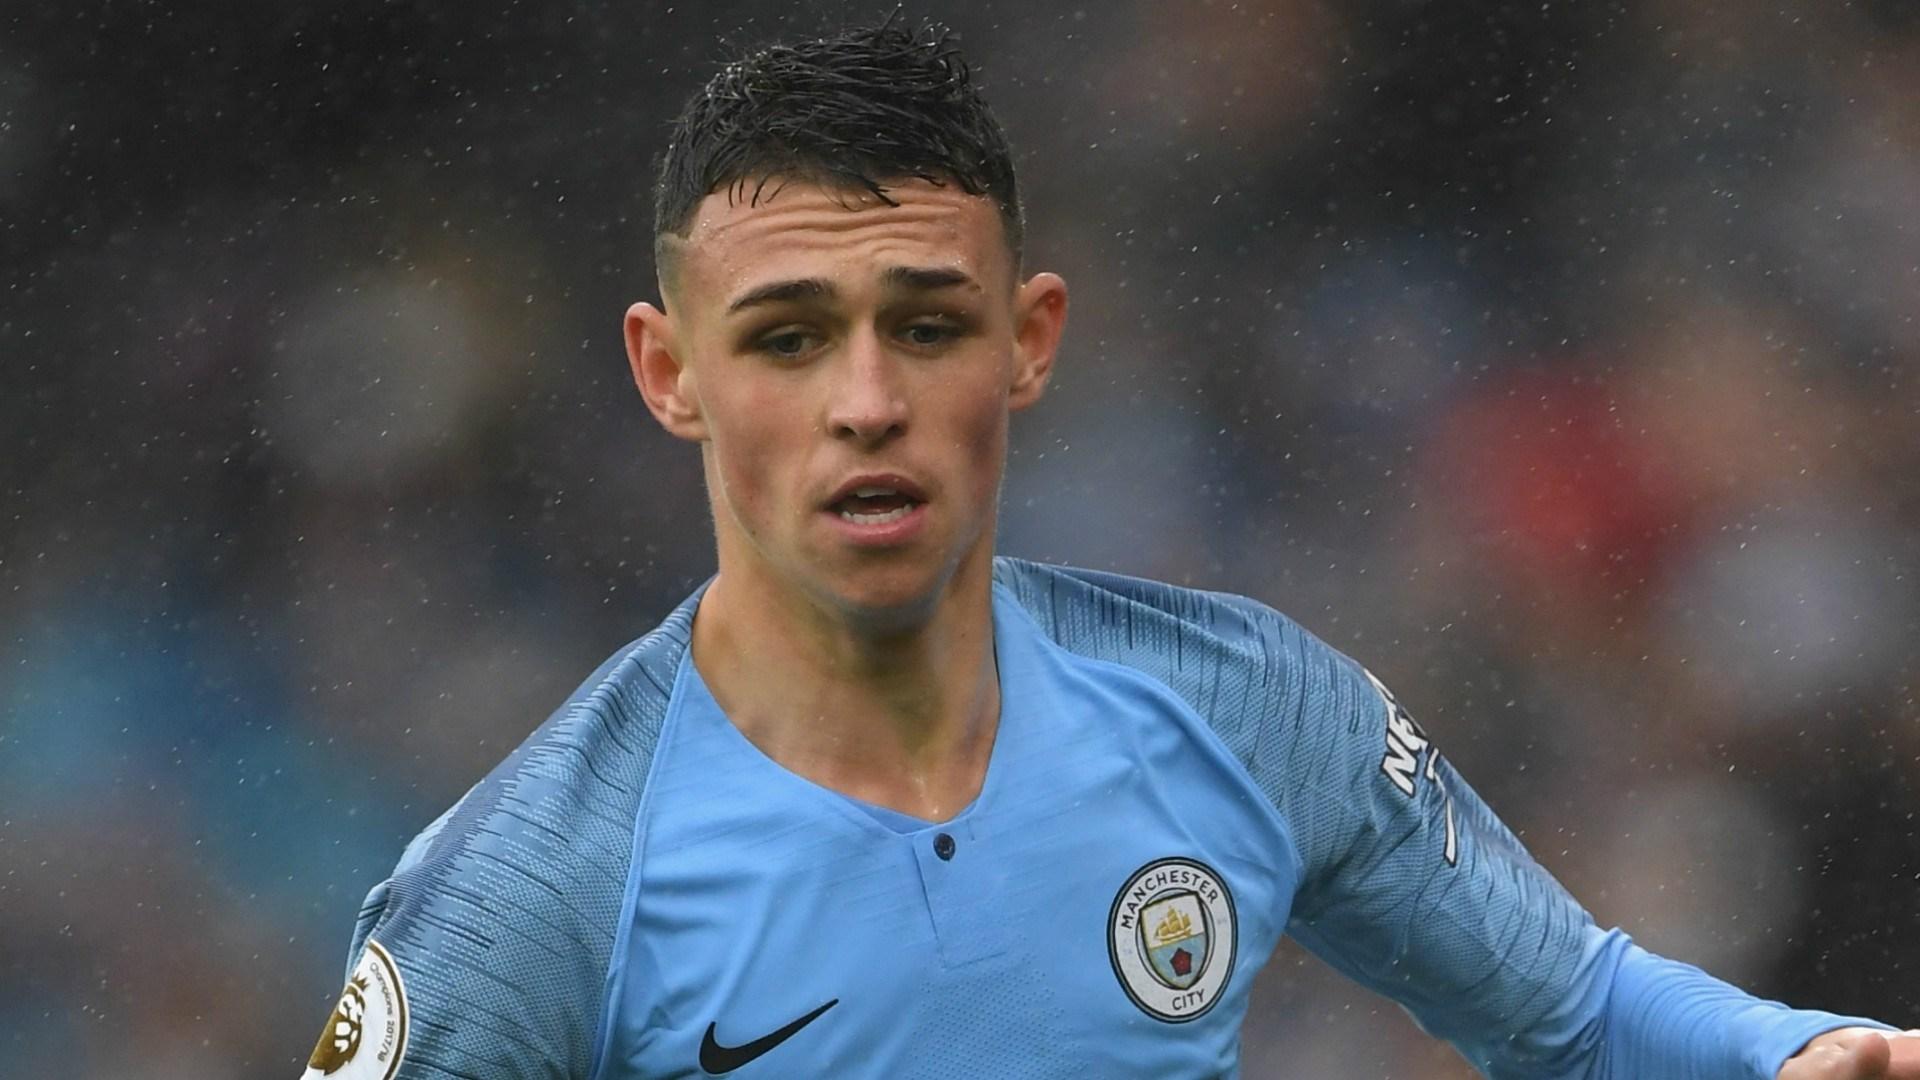 Search free phil foden wallpapers on zedge and personalize your phone to su...